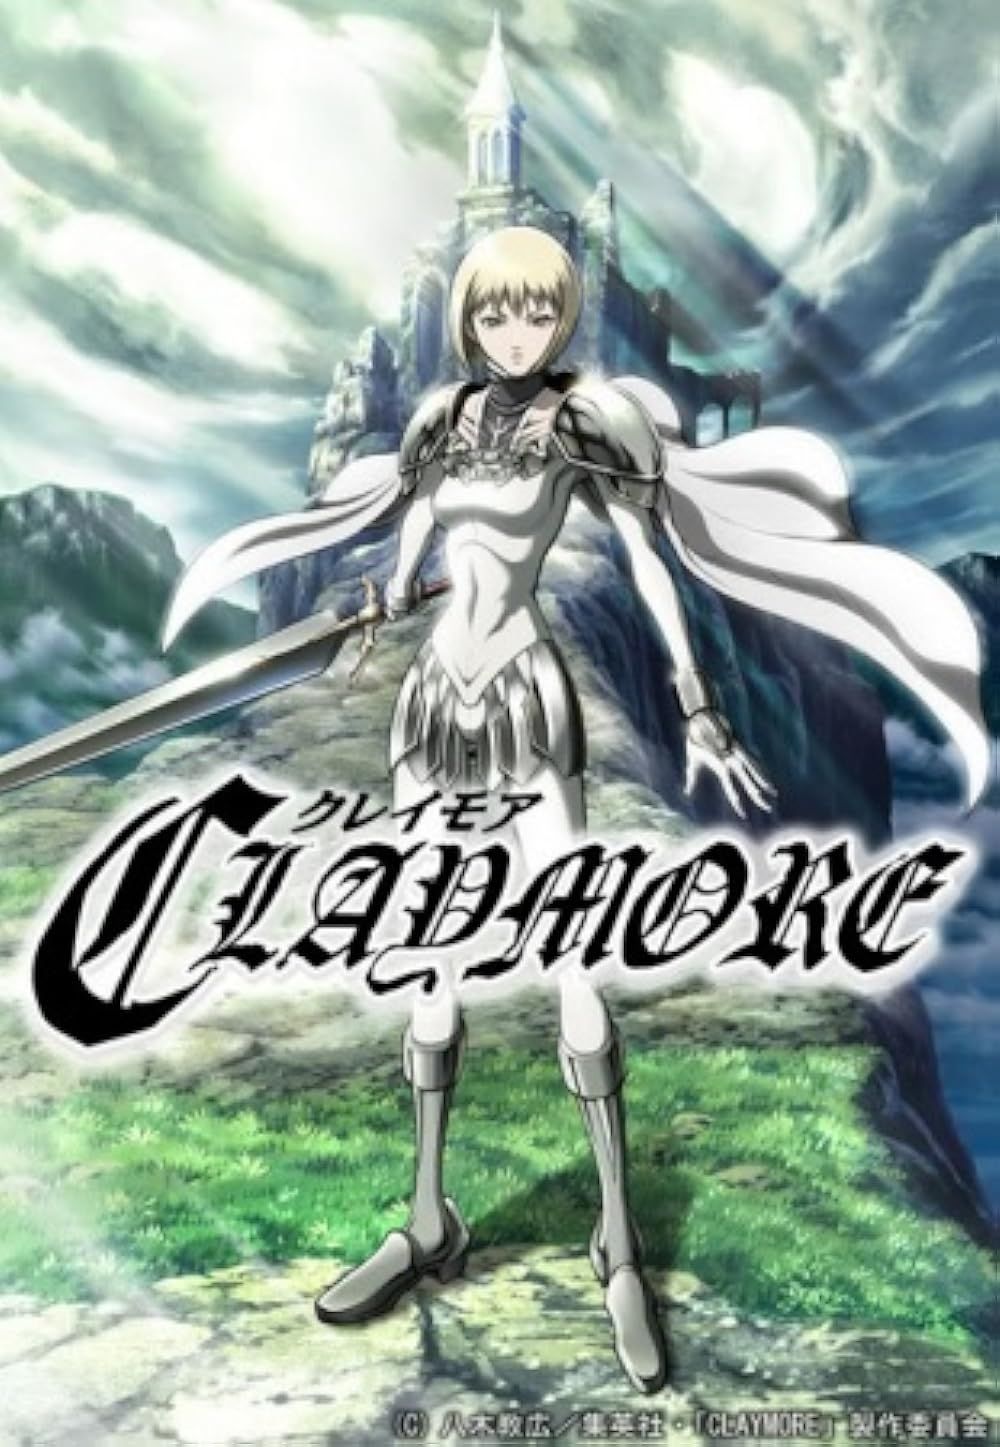 Poster for Claymore with Clare wielding her sword